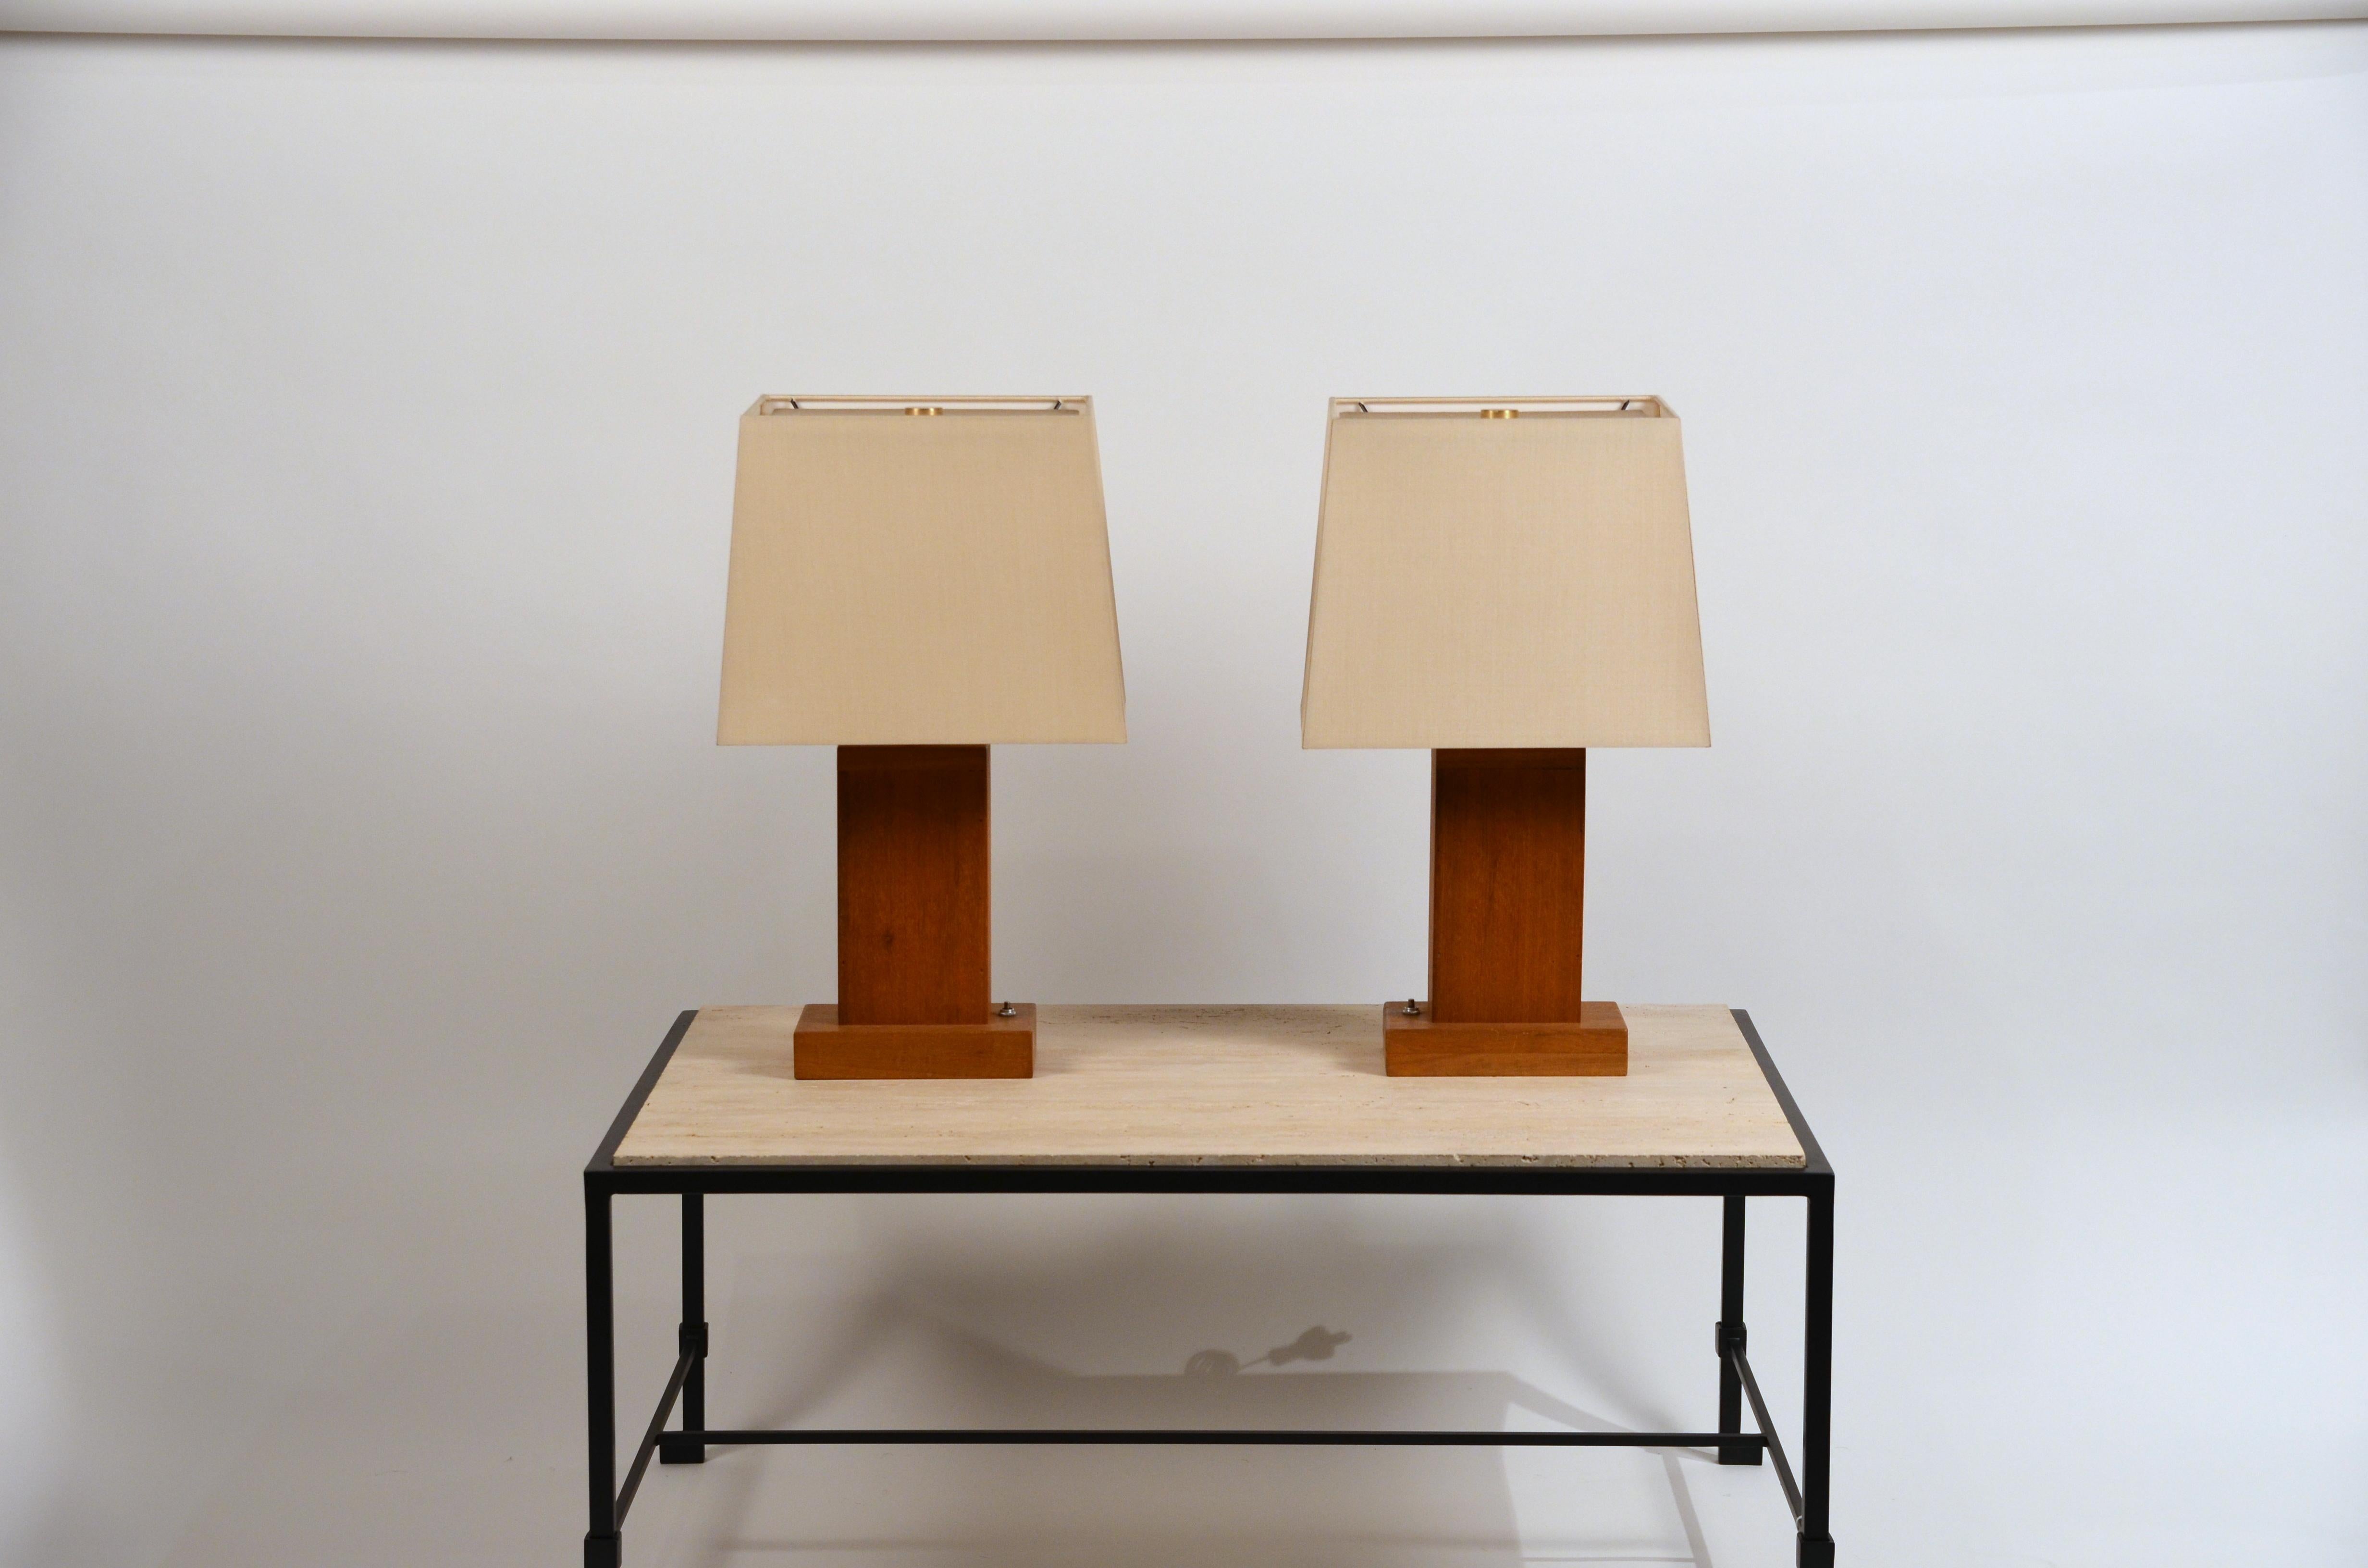 Pair of chic cubist bedside / table lamps with custom silk shades.

Custom made with symmetrical side switches. New custom silk shades with diffusers conceal the bulbs from above.

Overall dimensions: 22 in. tall x 13 in. wide x 10 in. deep. The